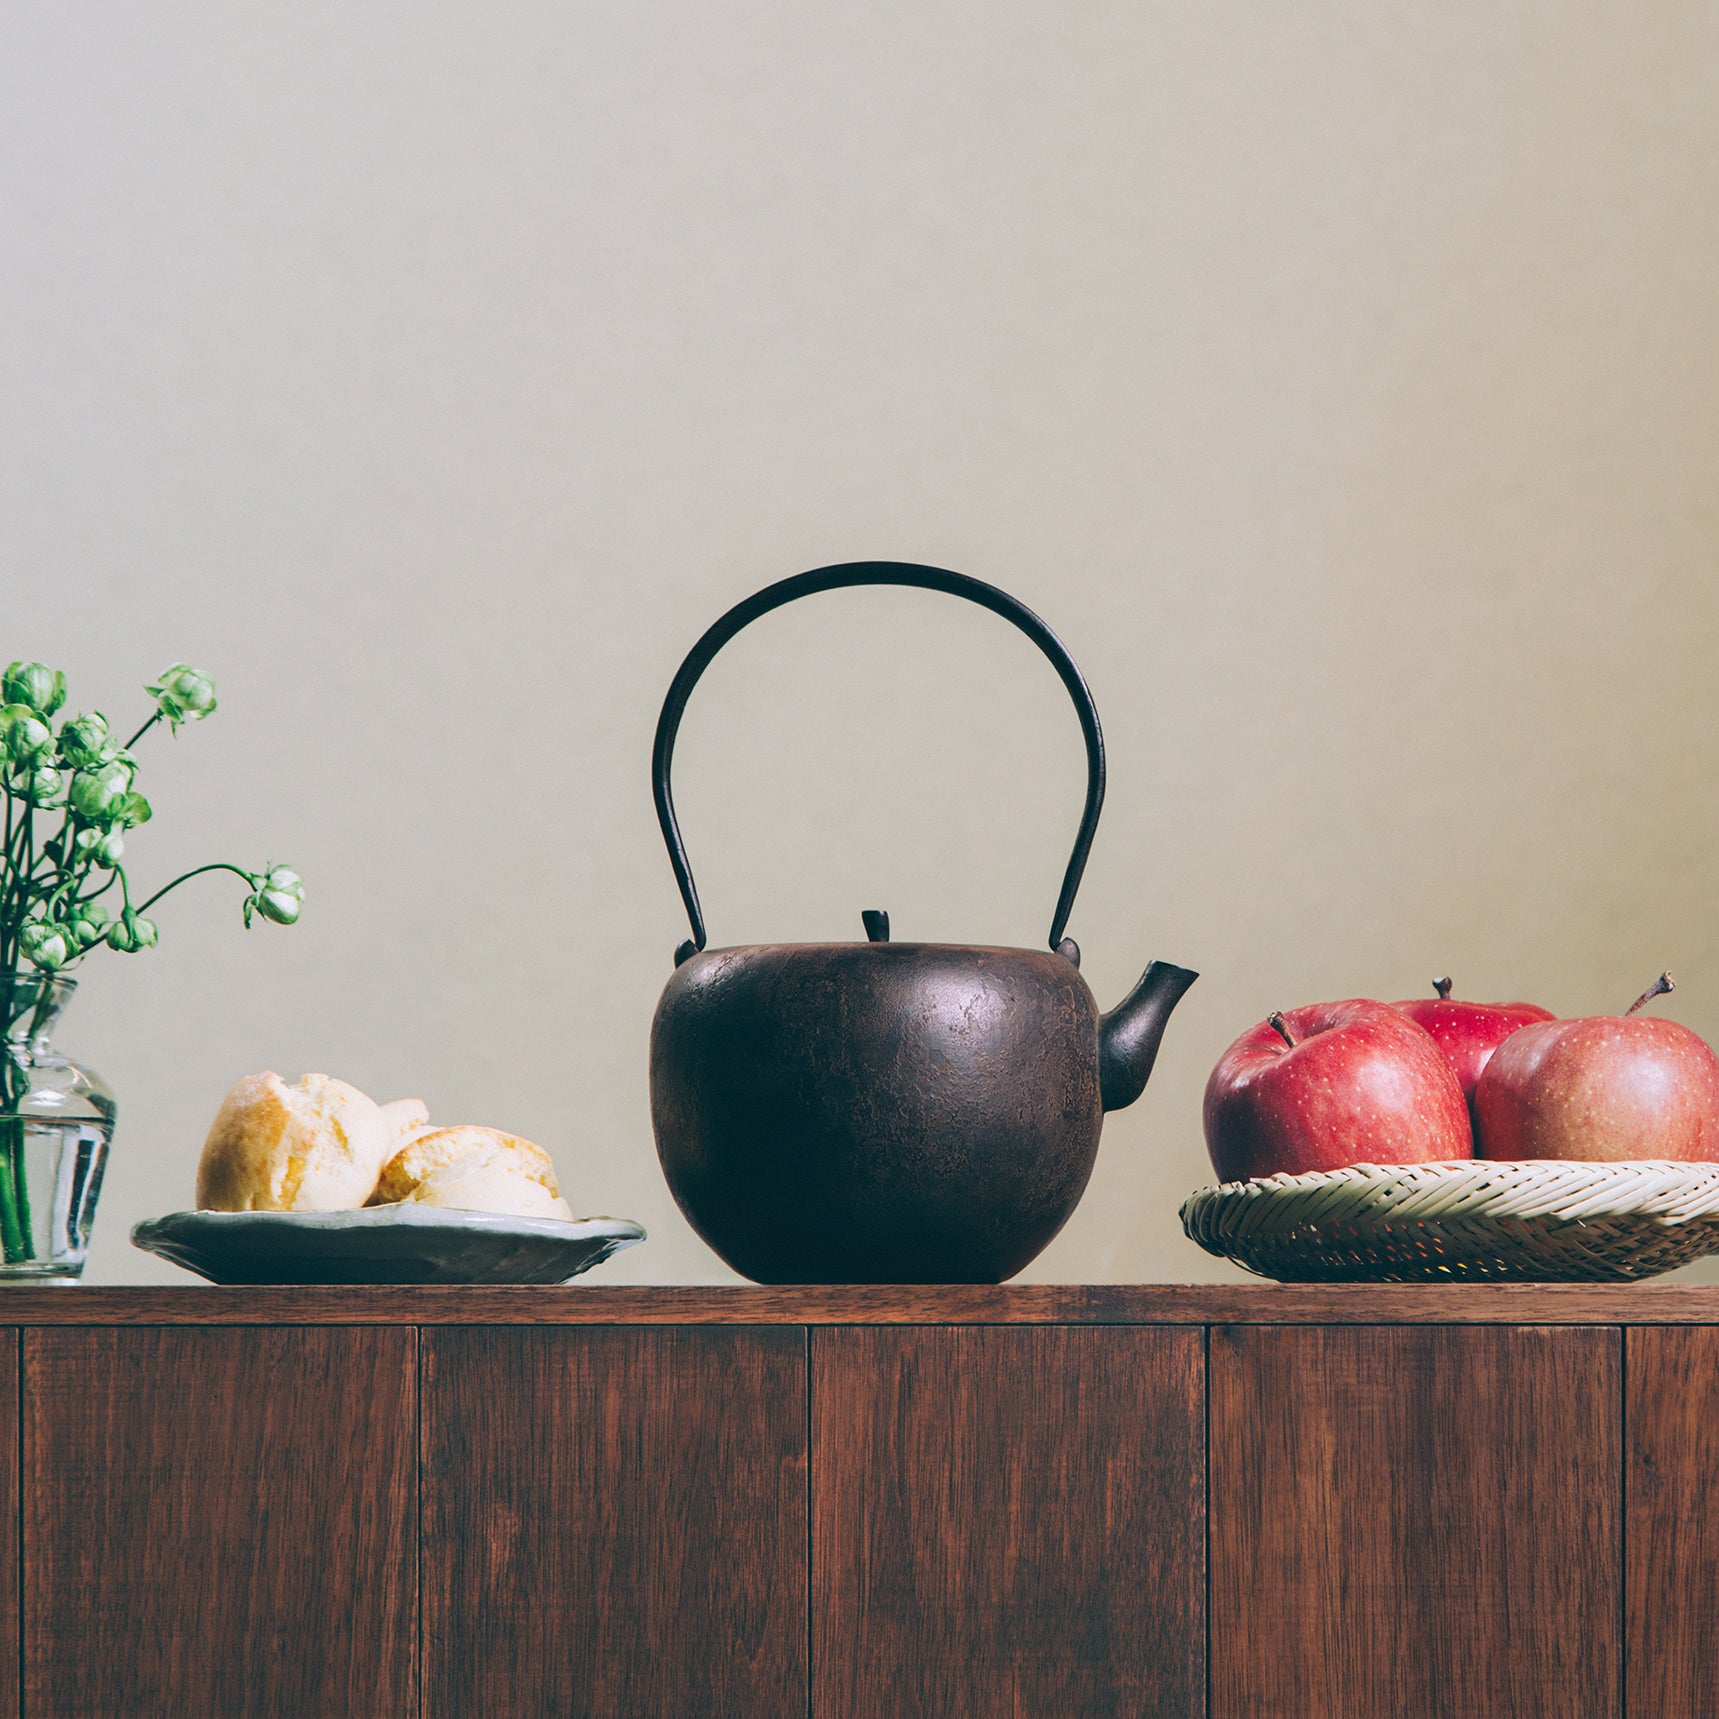 A wooden table is decorated with green flowers in a clear glass vase, a plate of scones, a basket of red apples, and in the center, a black cast iron kettle.  The kettle is round with a flat top and a lit a bit like the top of an apple. The kettle has a long handle on top.